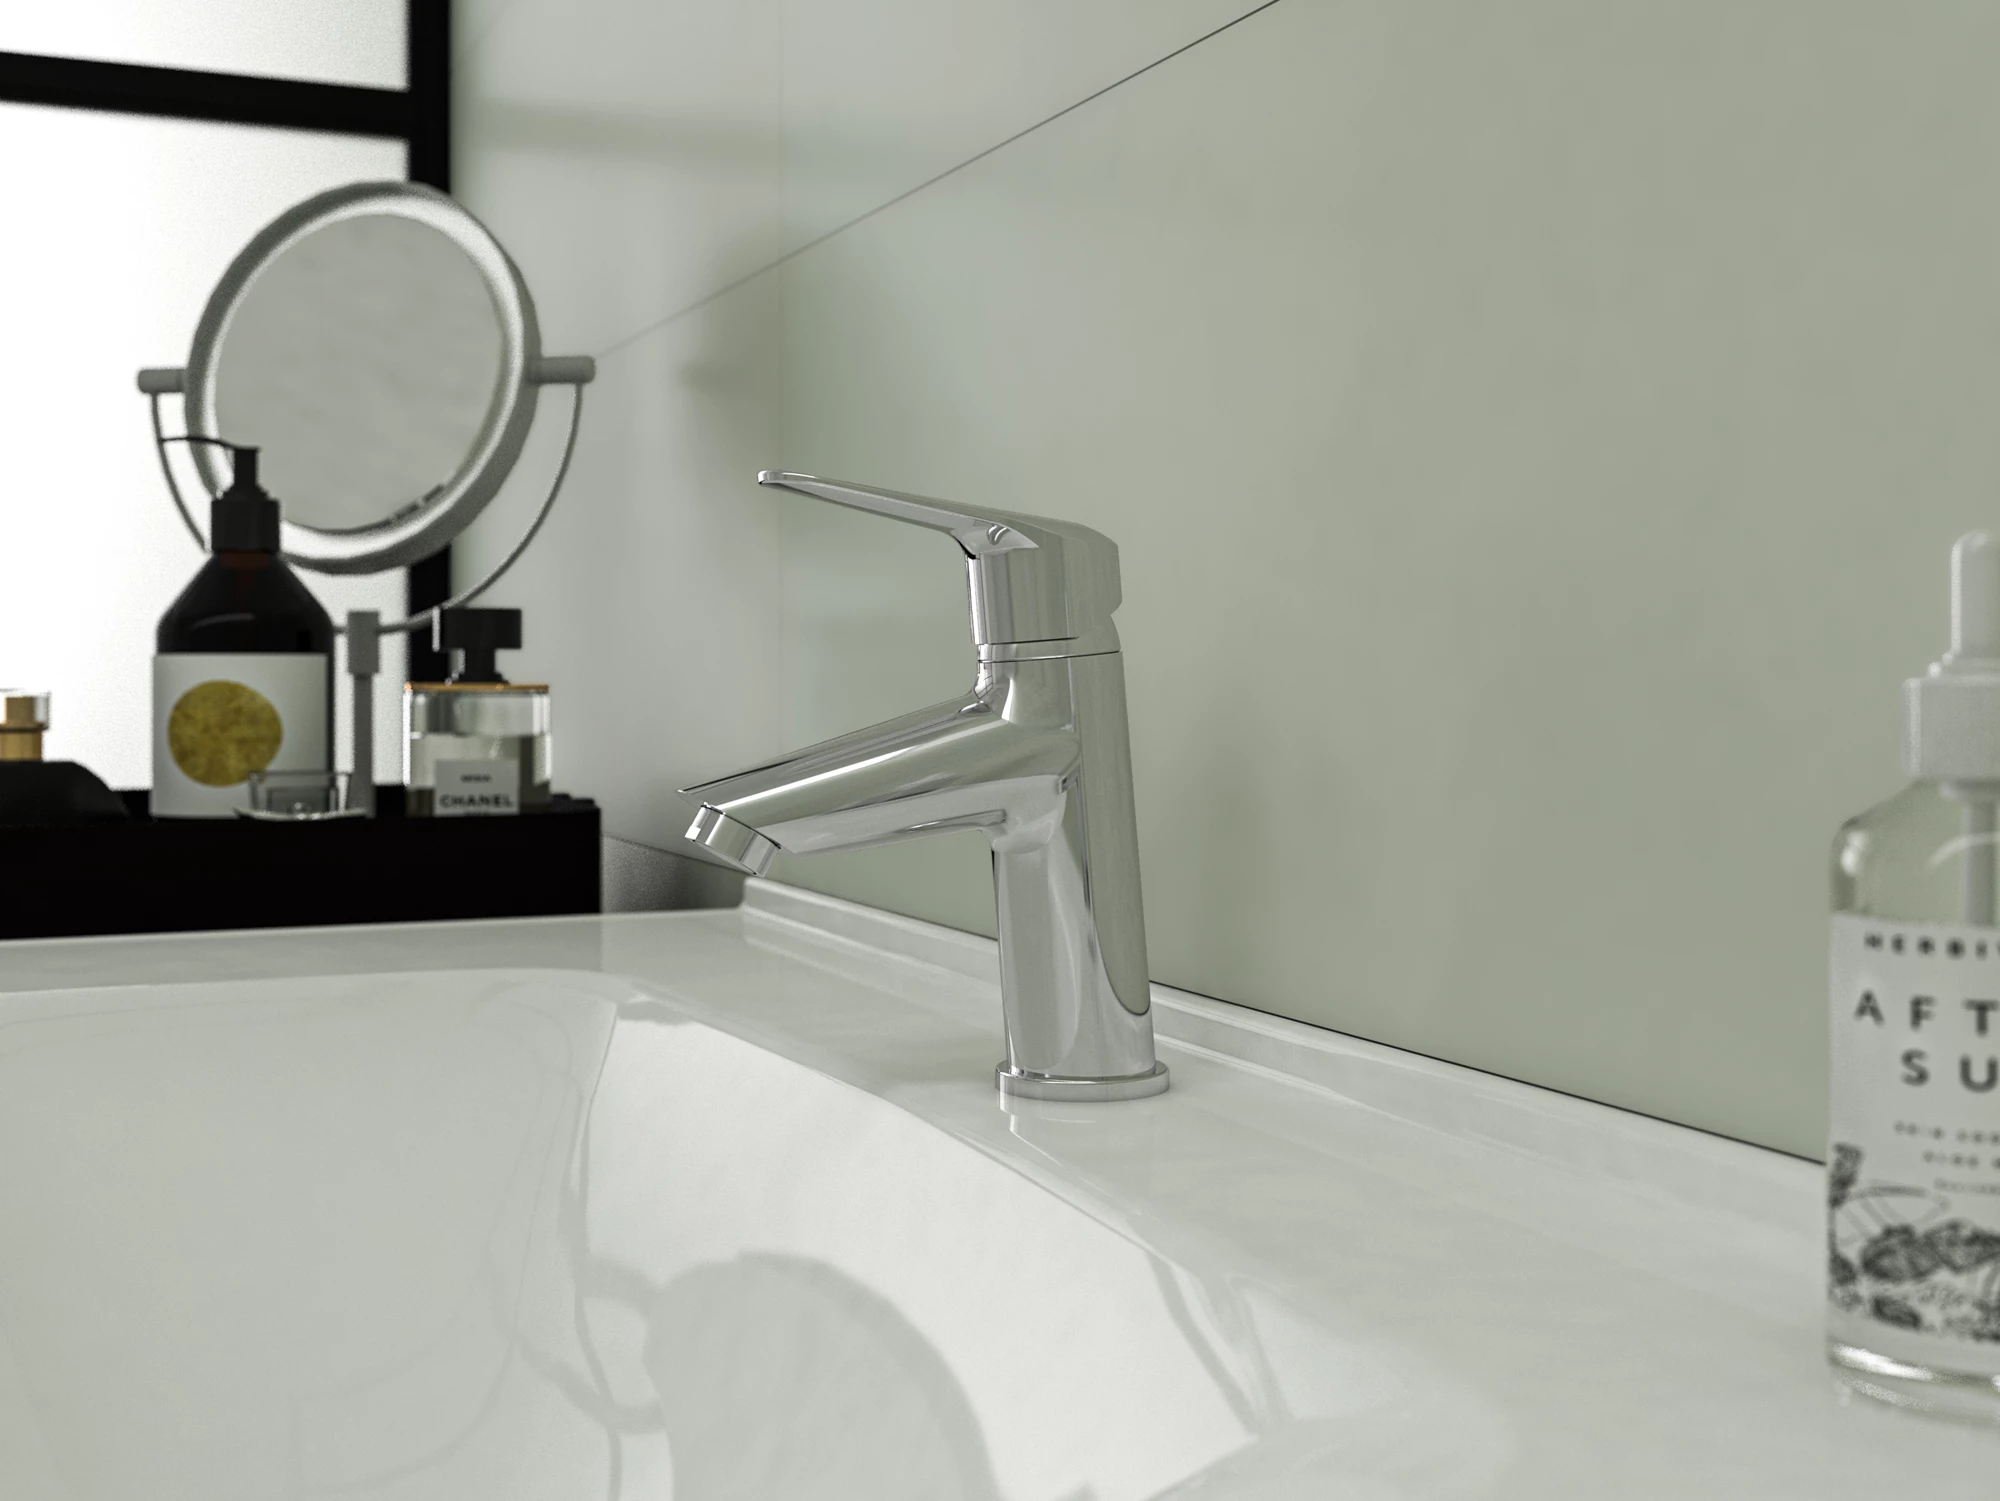 Trevi Sink Mixer Swivel Spout With Ball Joint Aerator